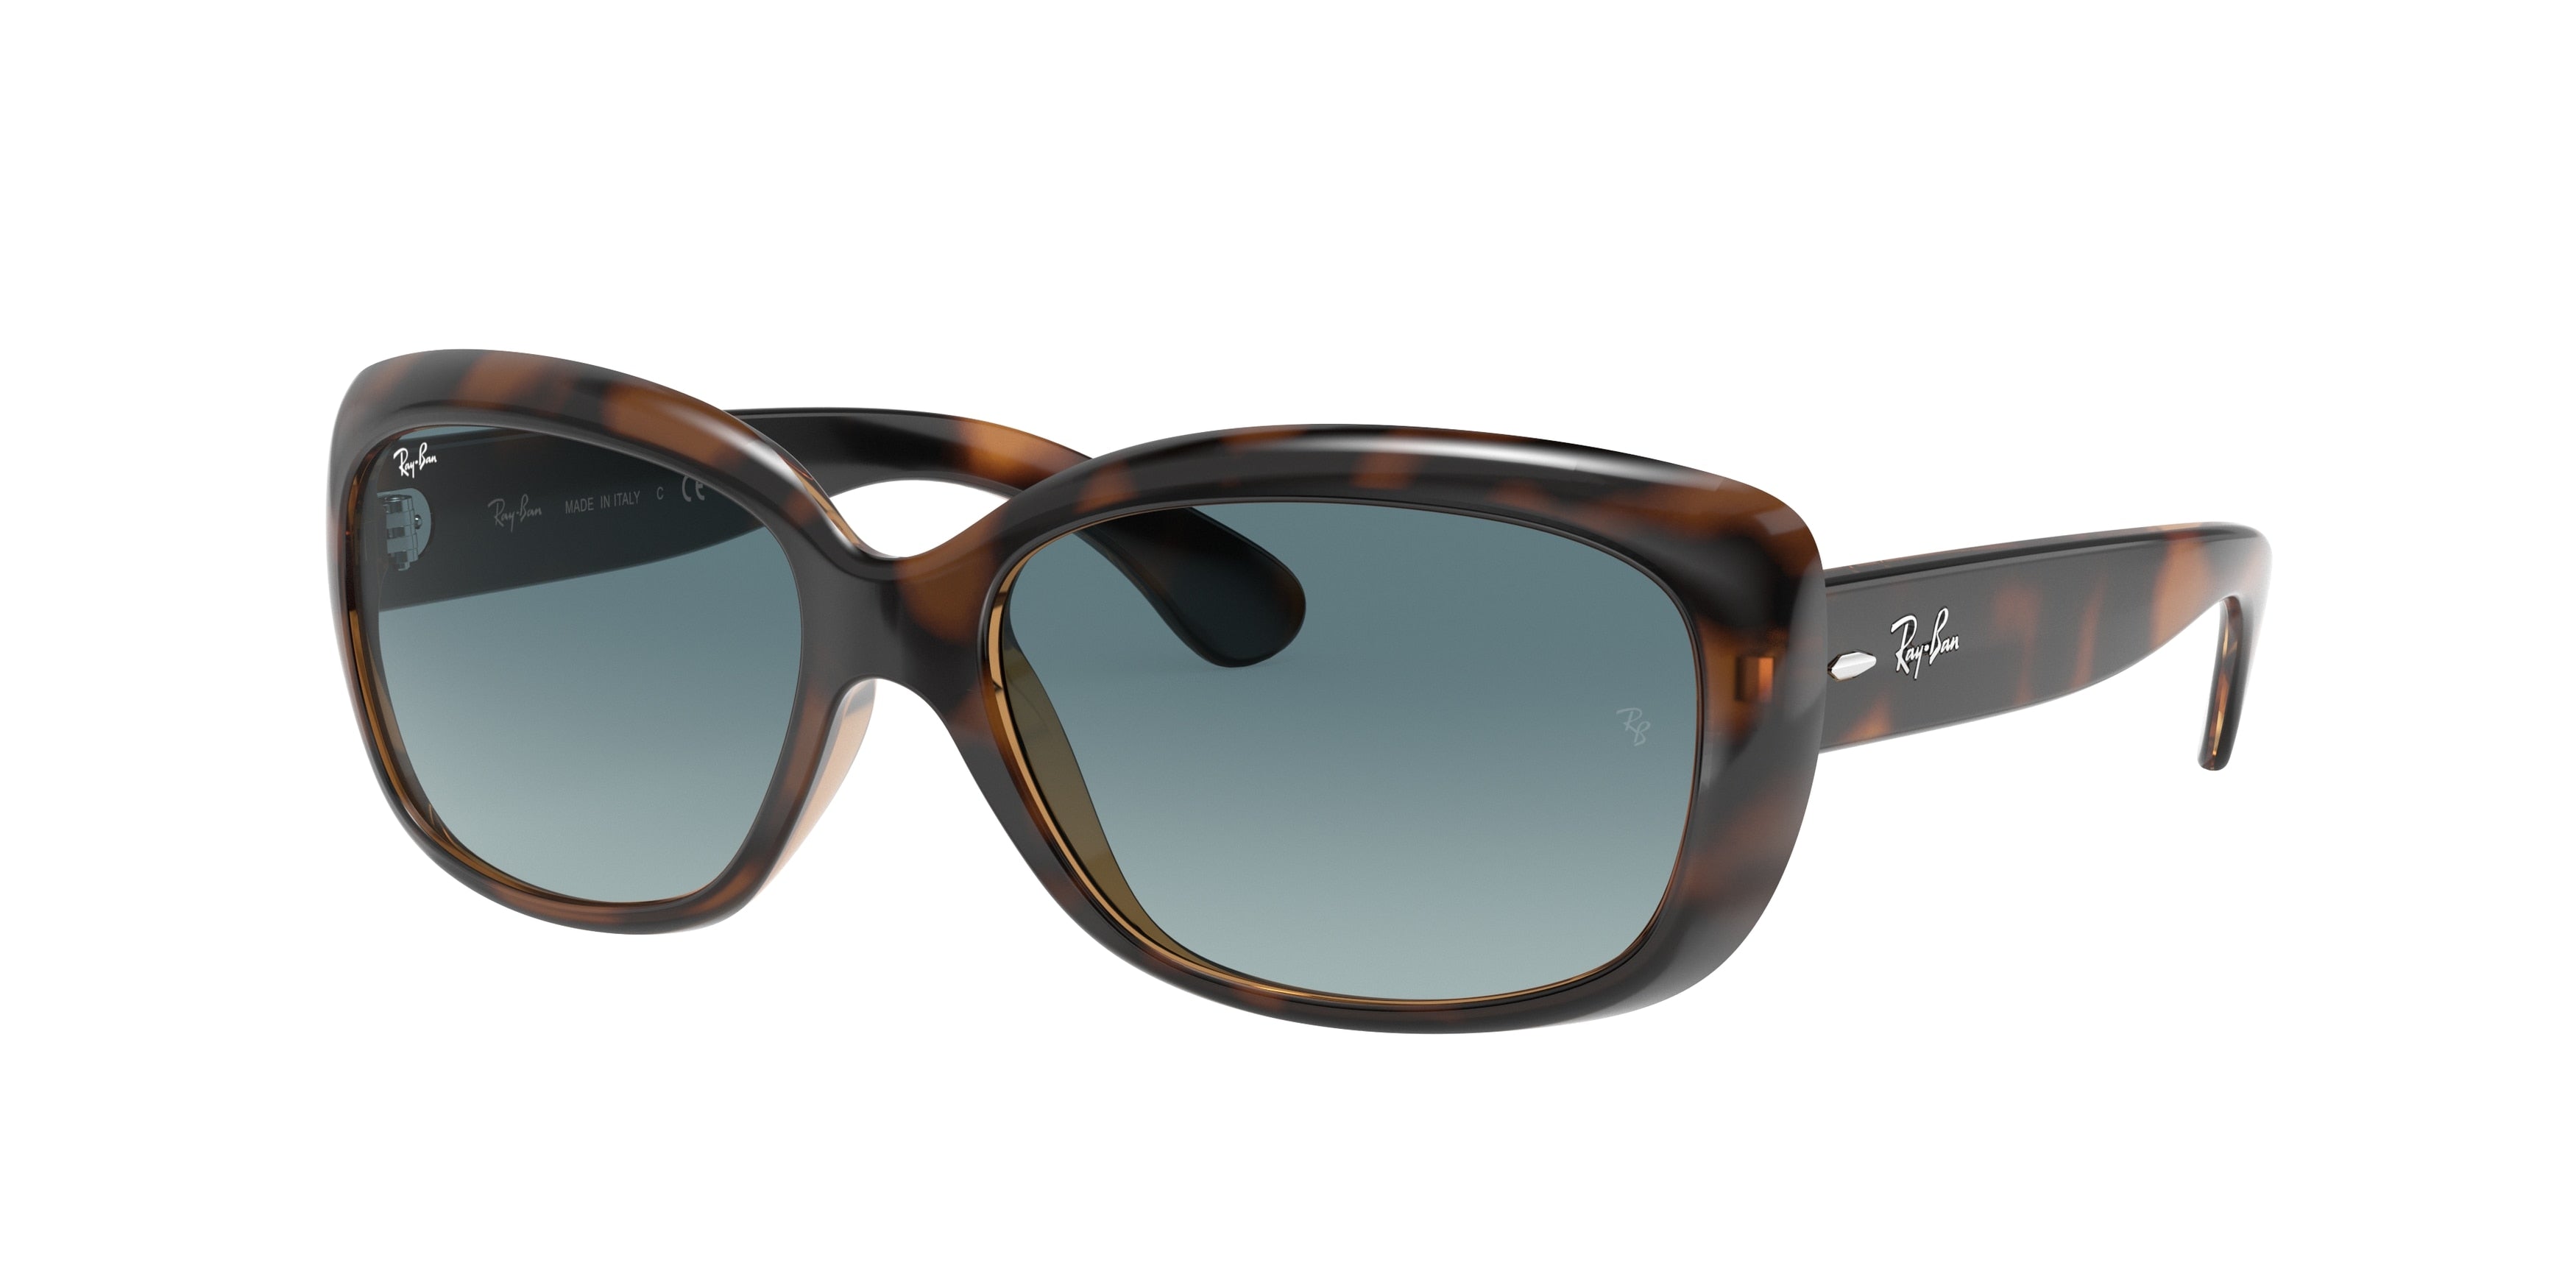 Ray-Ban JACKIE OHH RB4101 Butterfly Sunglasses  642/3M-Havana 57-135-17 - Color Map Tortoise